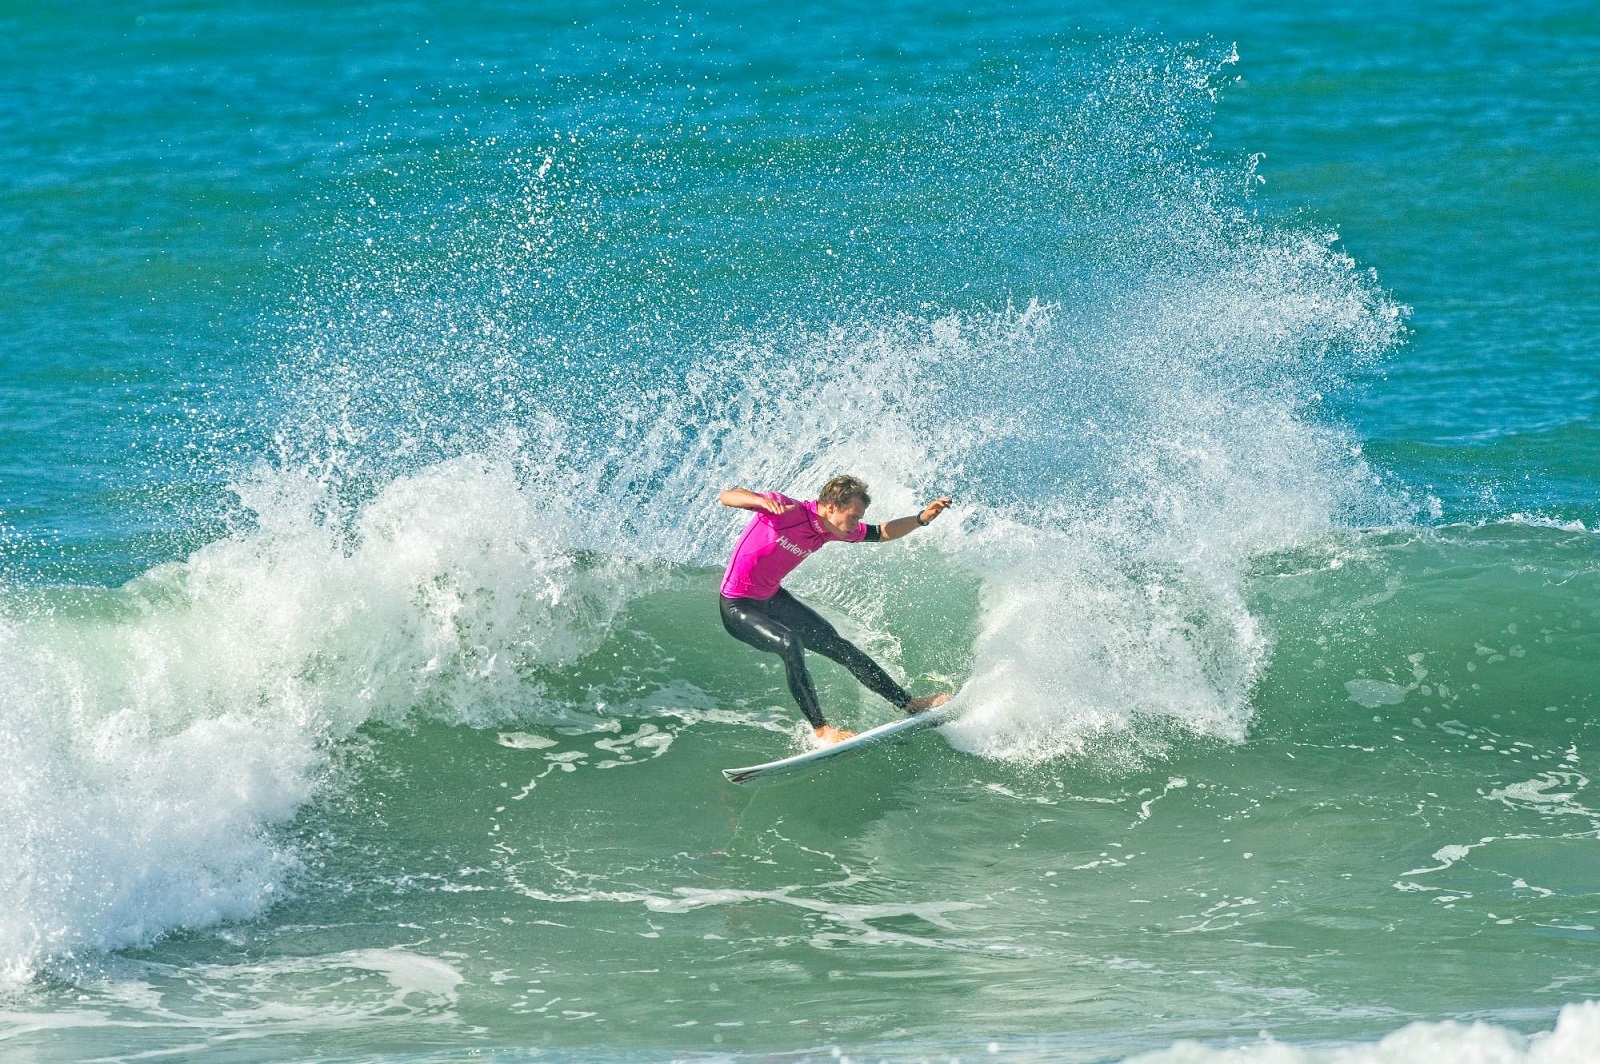 Hurley Partners with Black Girls Surf